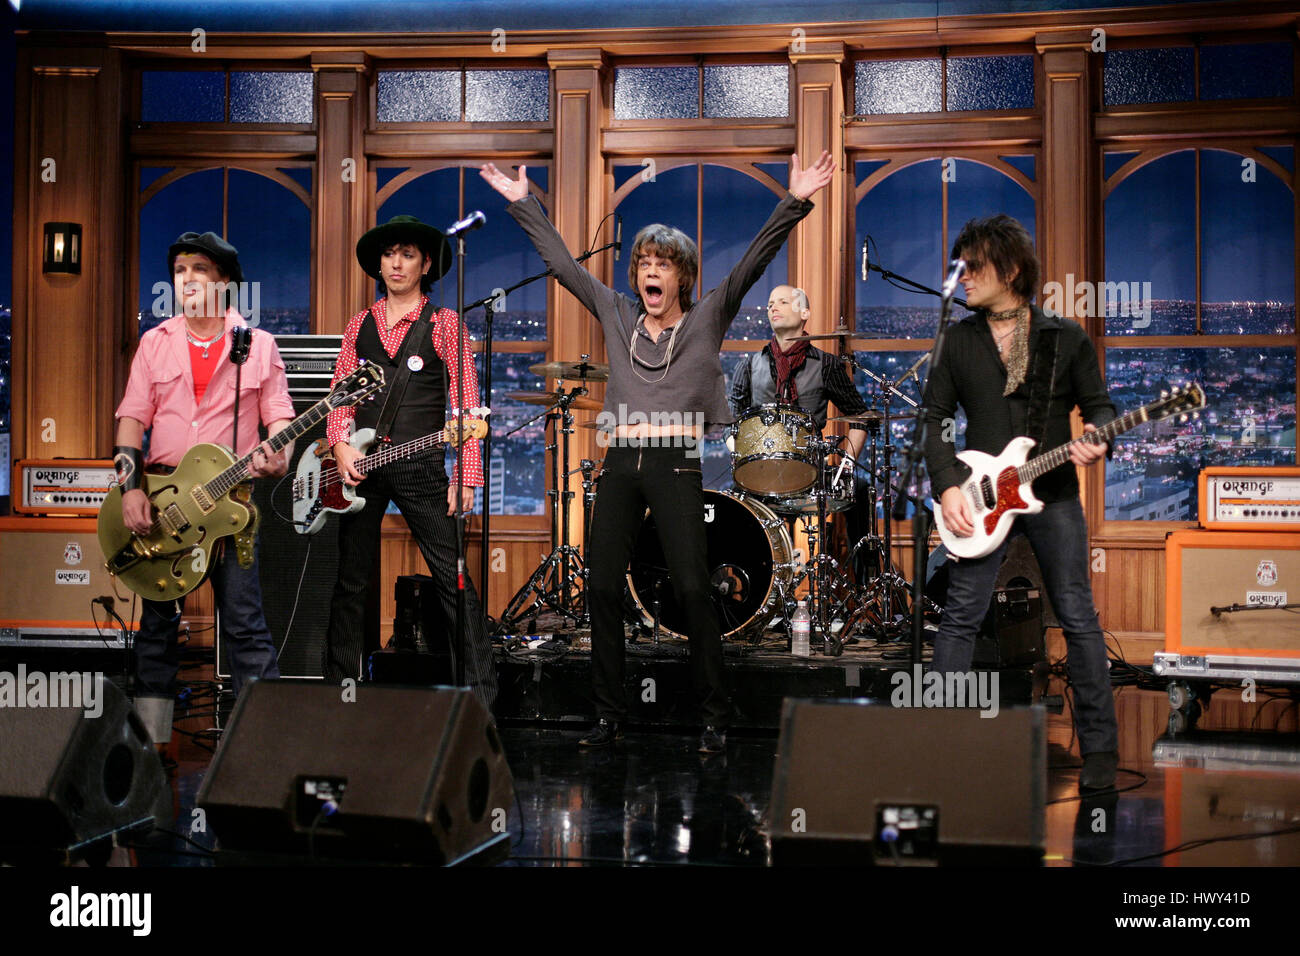 The band, 'New York Dolls' with David Johansen on lead vocals, Sylvain Sylvain, left, on guitar, Brian Delaney on drums, Sami Takamaki-Guy on bass and Steve Conte on guitar, perform during a segment of 'The Late Late Show with Craig Ferguson' at CBS Television City in Los Angeles on Tuesday, Oct. 28, 2008. Photo by Francis Specker Stock Photo